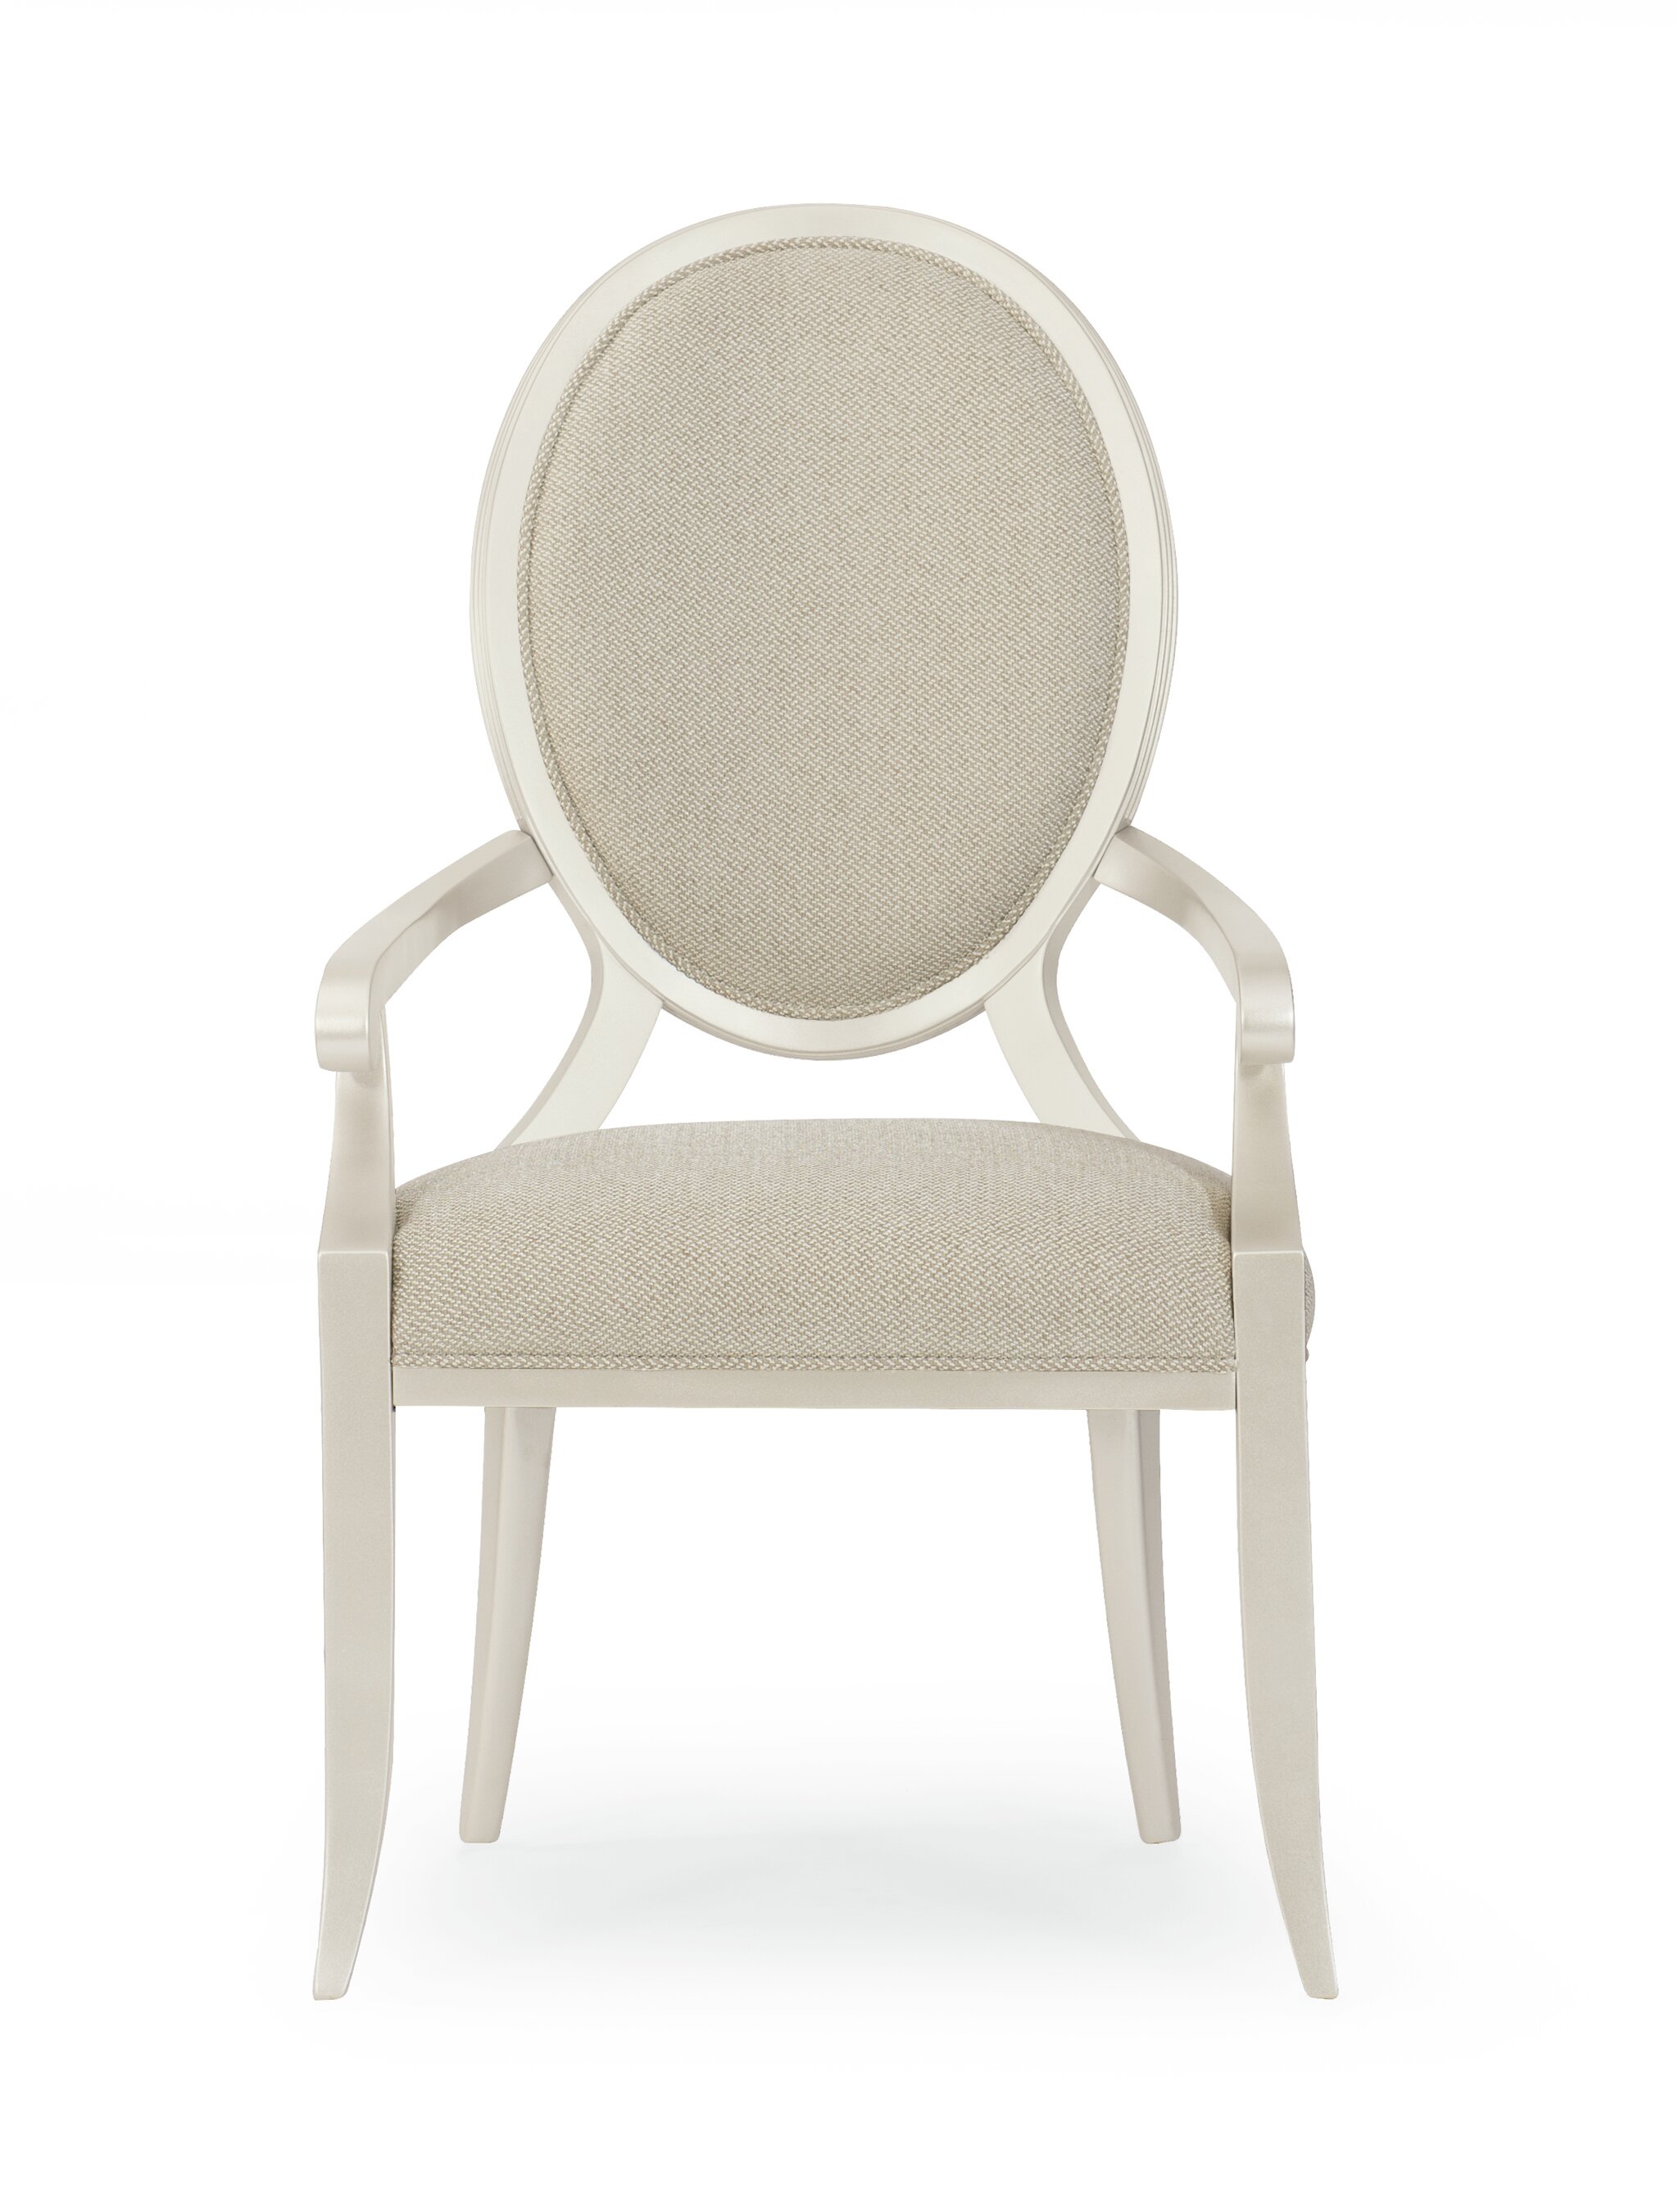 avondale brushed tweed round back upholstered dining chair with arms